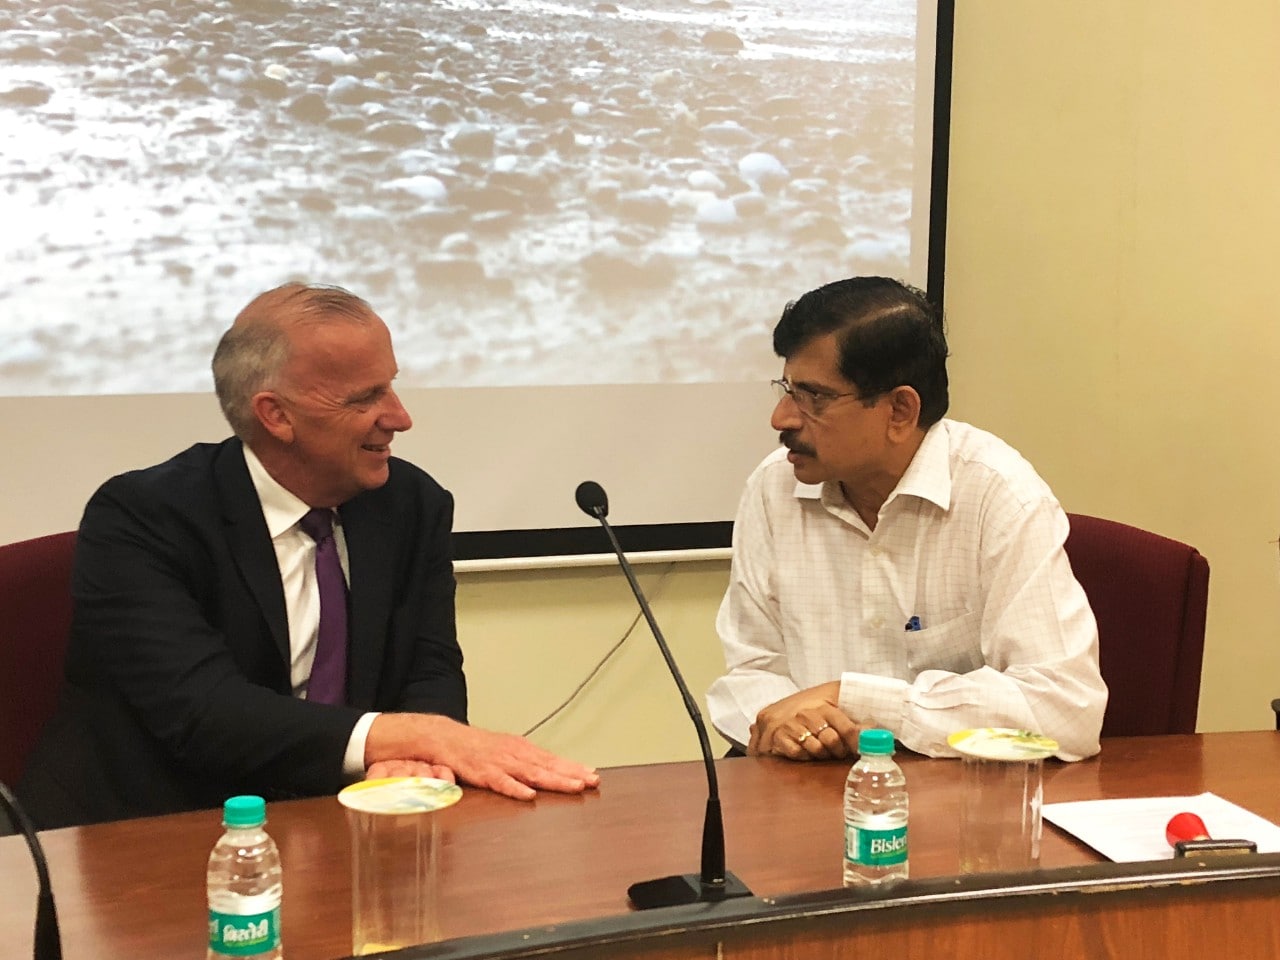 Vice-Chancellor of the University of Sydney Dr Michael Spence and Registrar of Tata Institute of Social Sciences Dr C. P. Mohan Kumar.